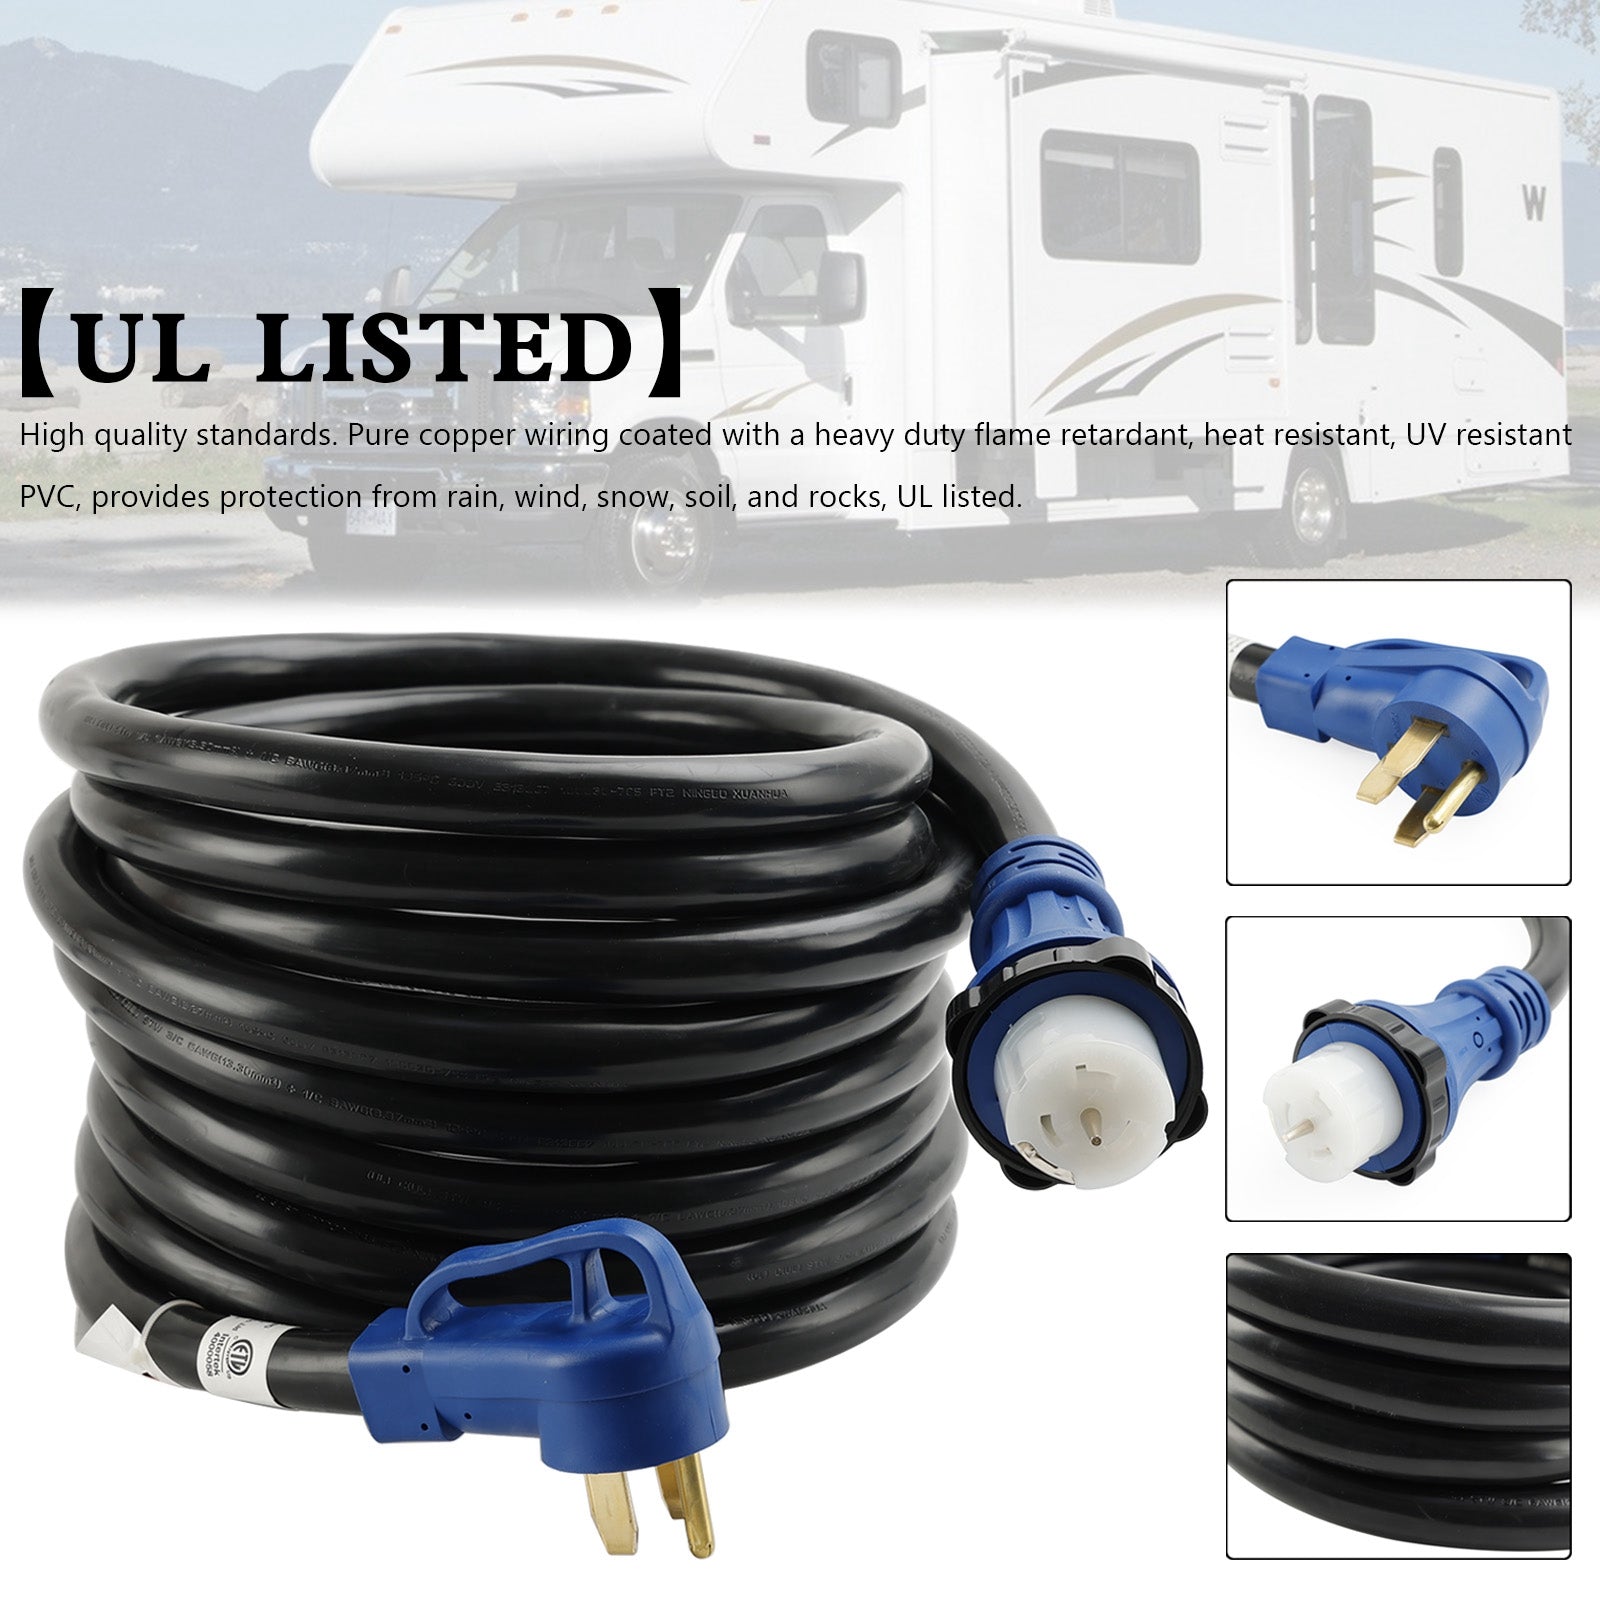 RV Camper UL Listed 50 Amp 25 Ft RV/Generator Cord With Locking Connector - 0